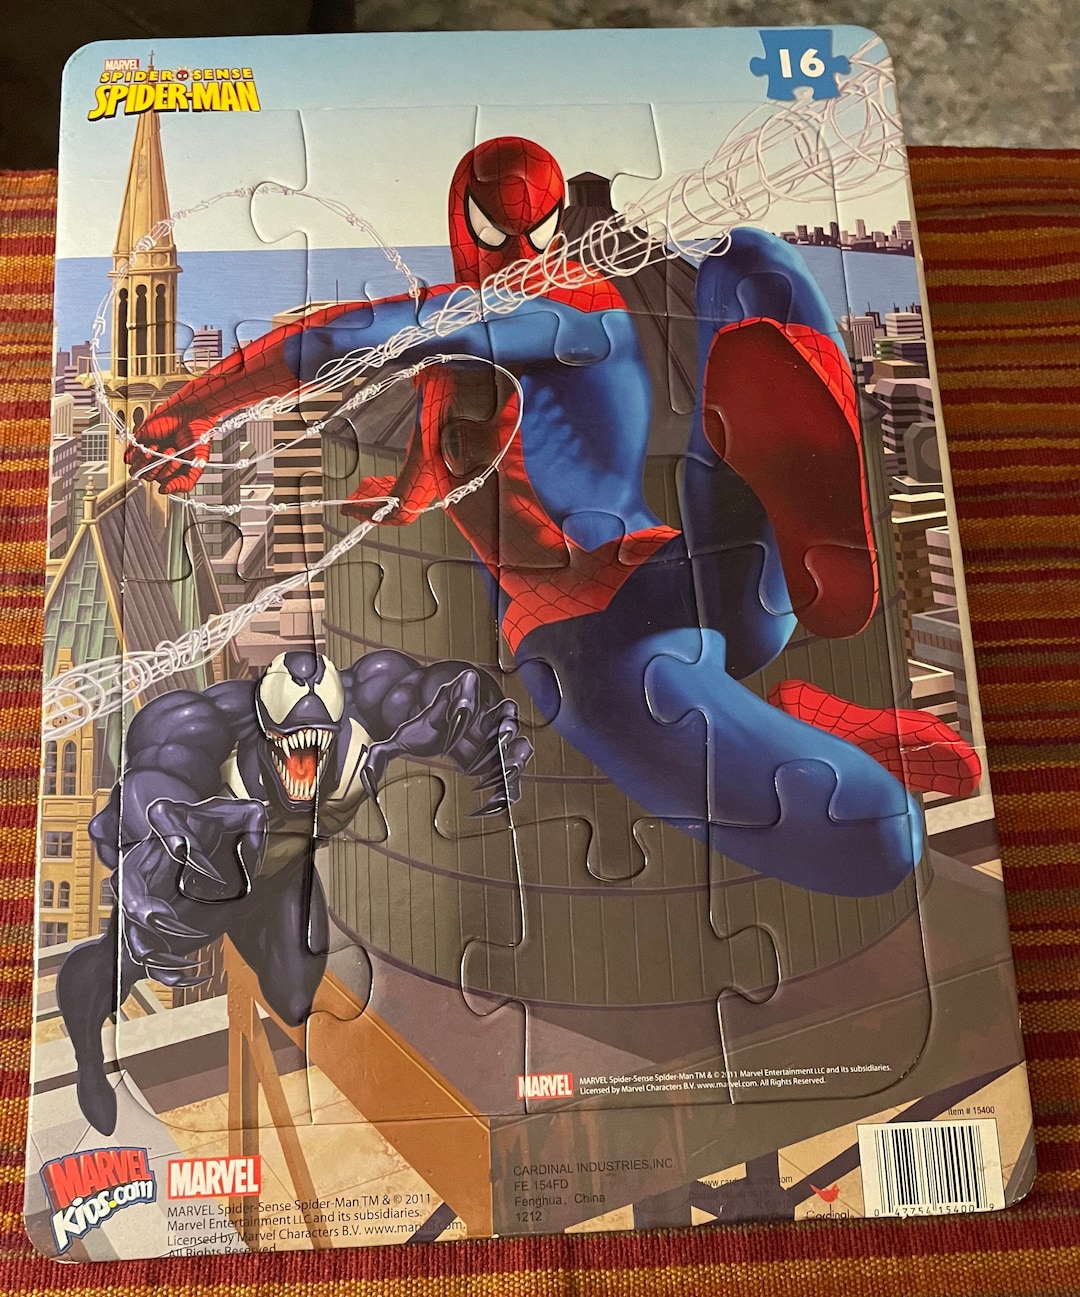 Marvel Tales featuring Spider-Man 500 Piece Jigsaw Puzzle